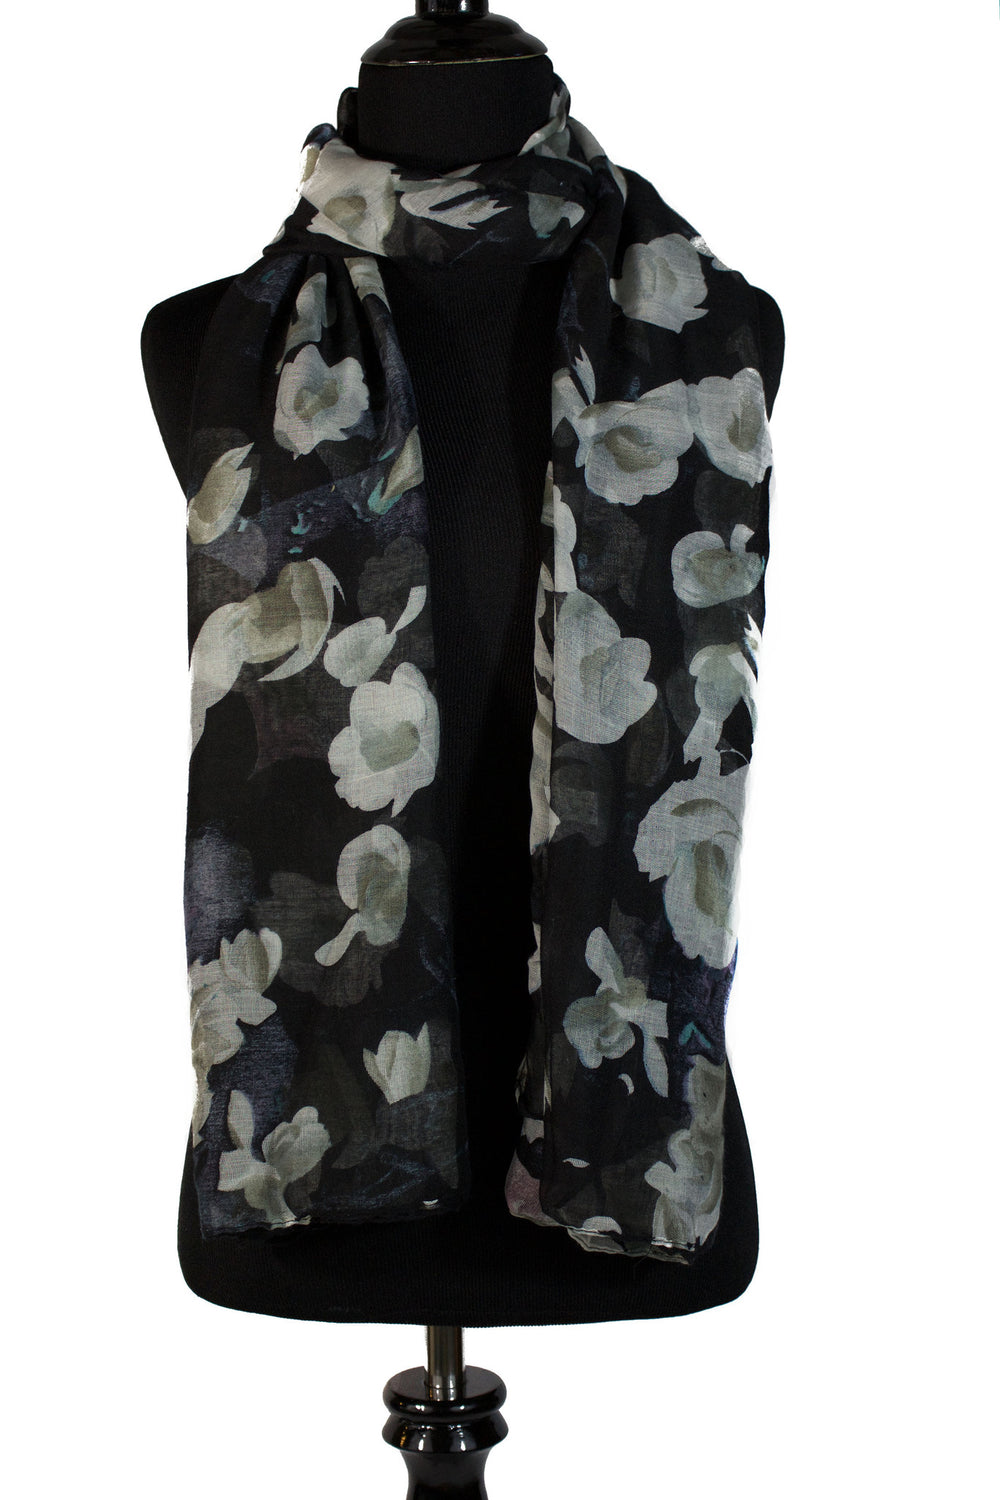 black floral hijab with white flowers 